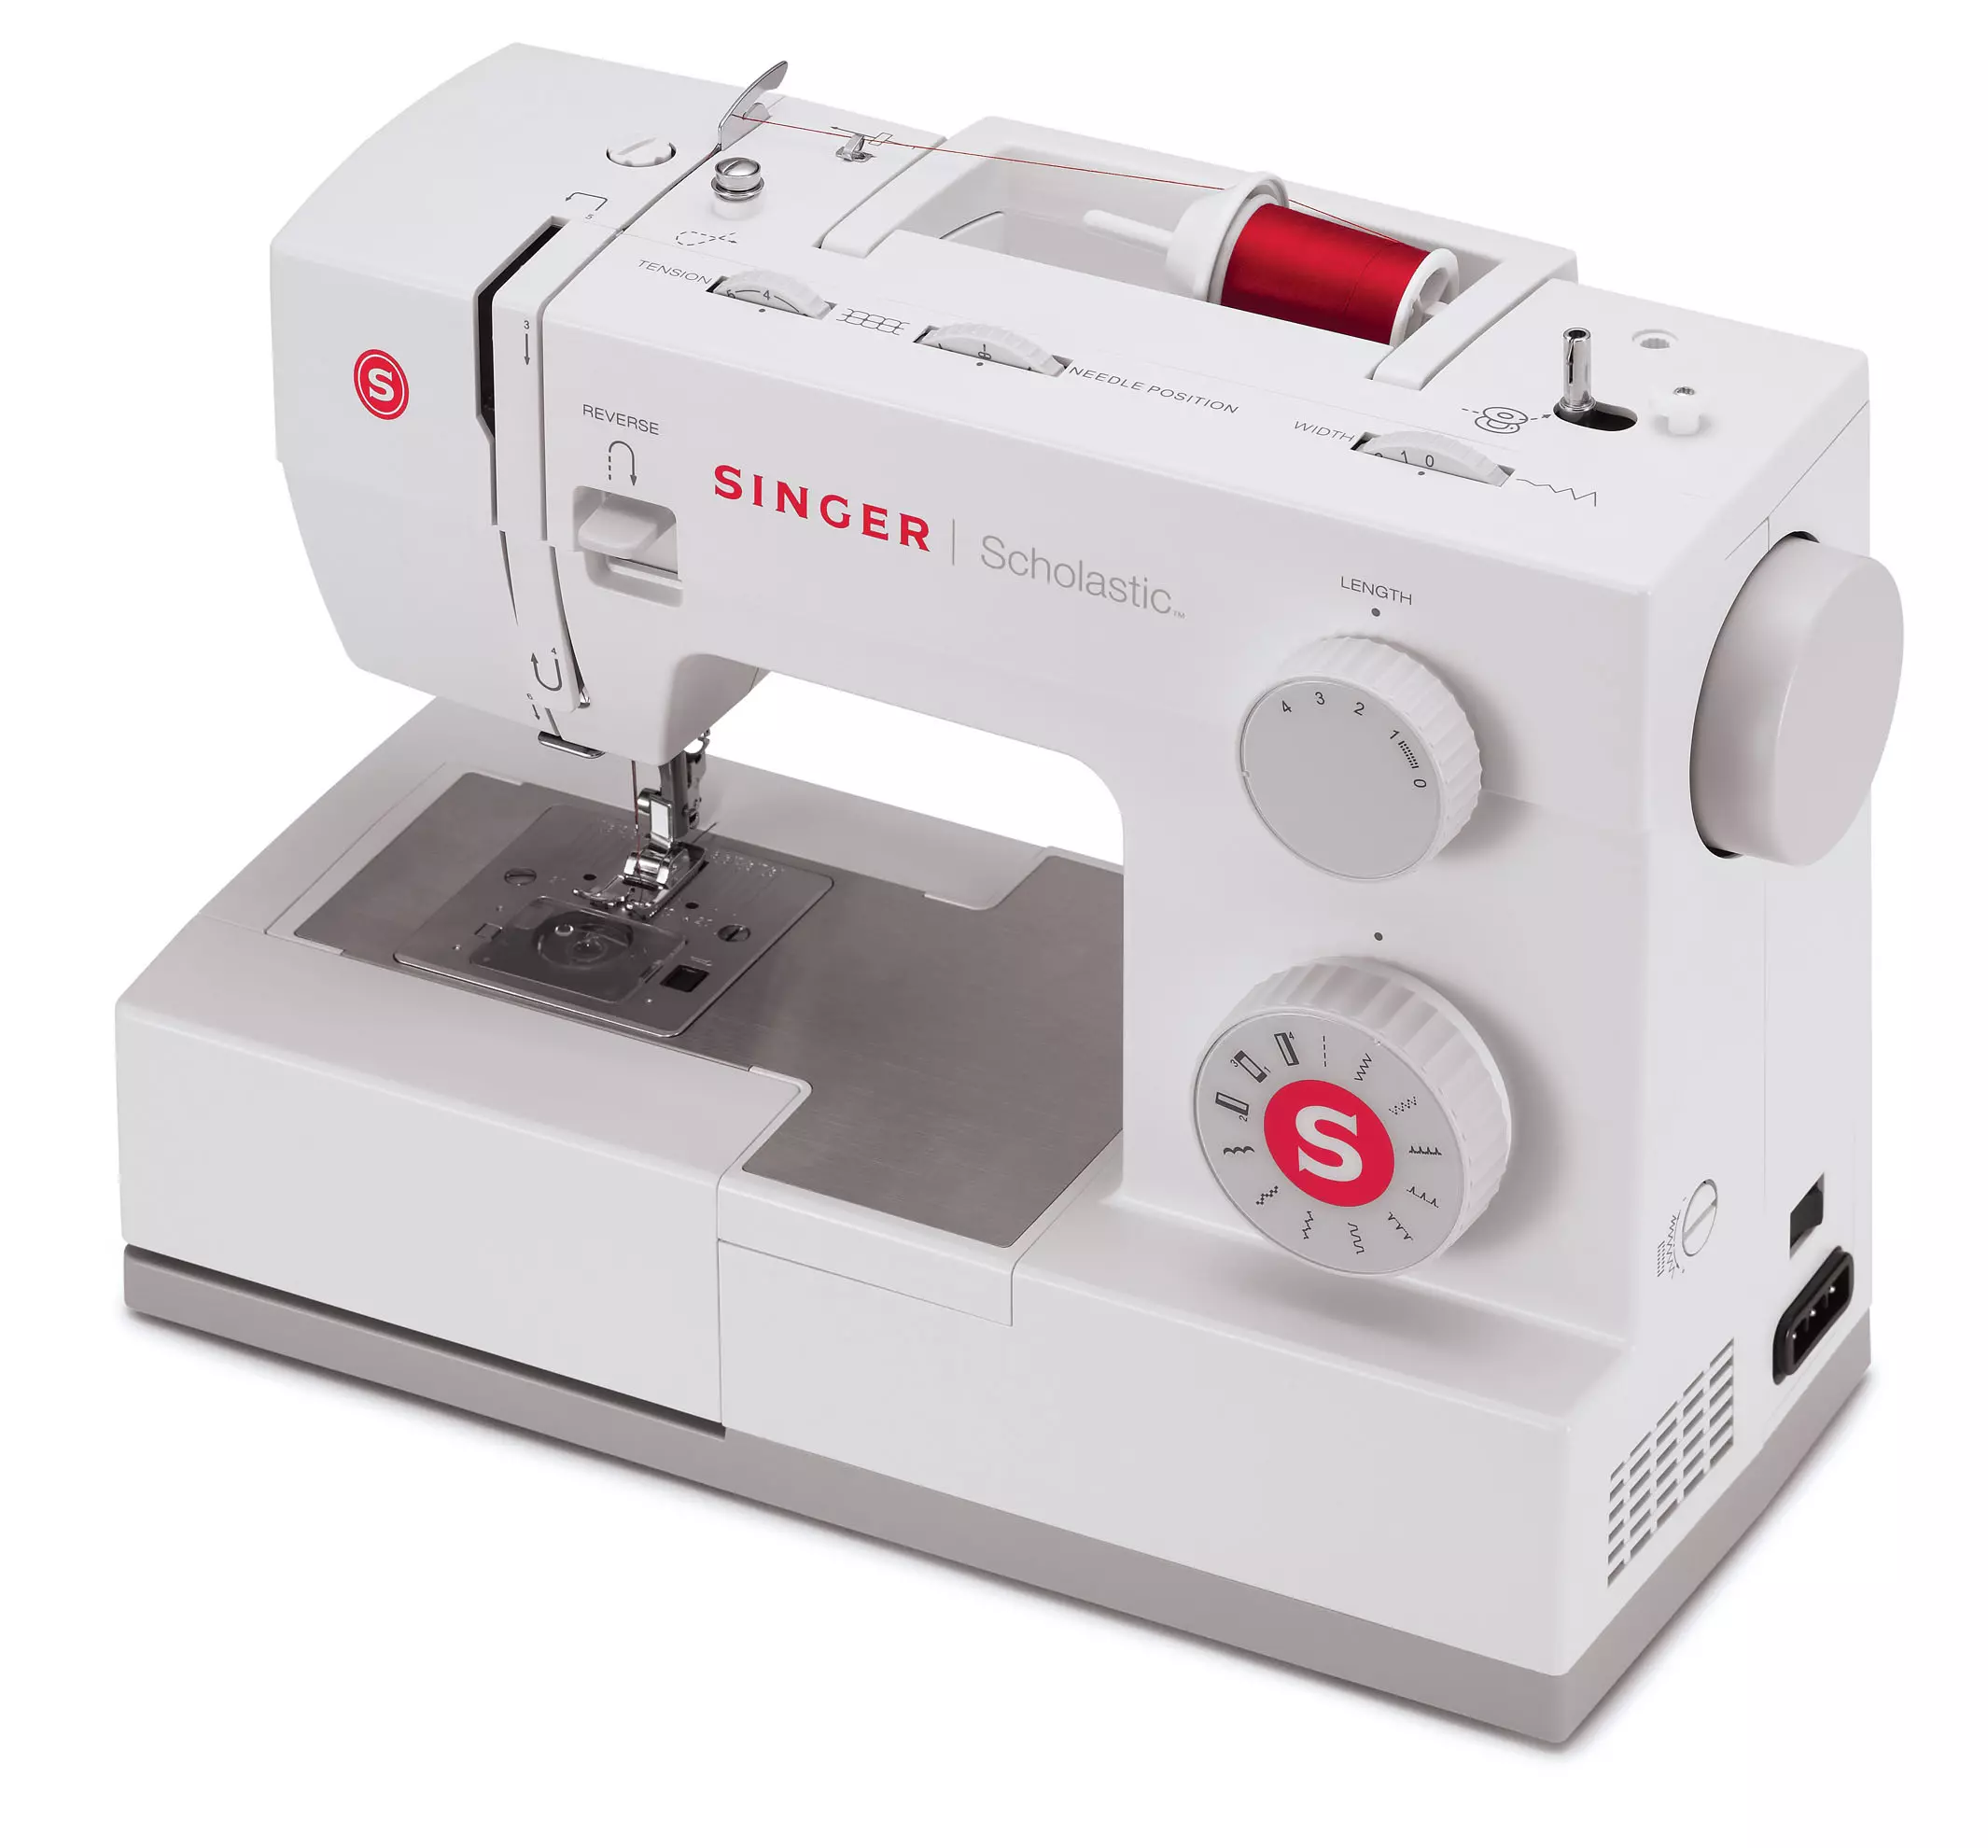 Singer Heavy Duty 4411 Sewing Machine with Free upgrade to new 5511 model